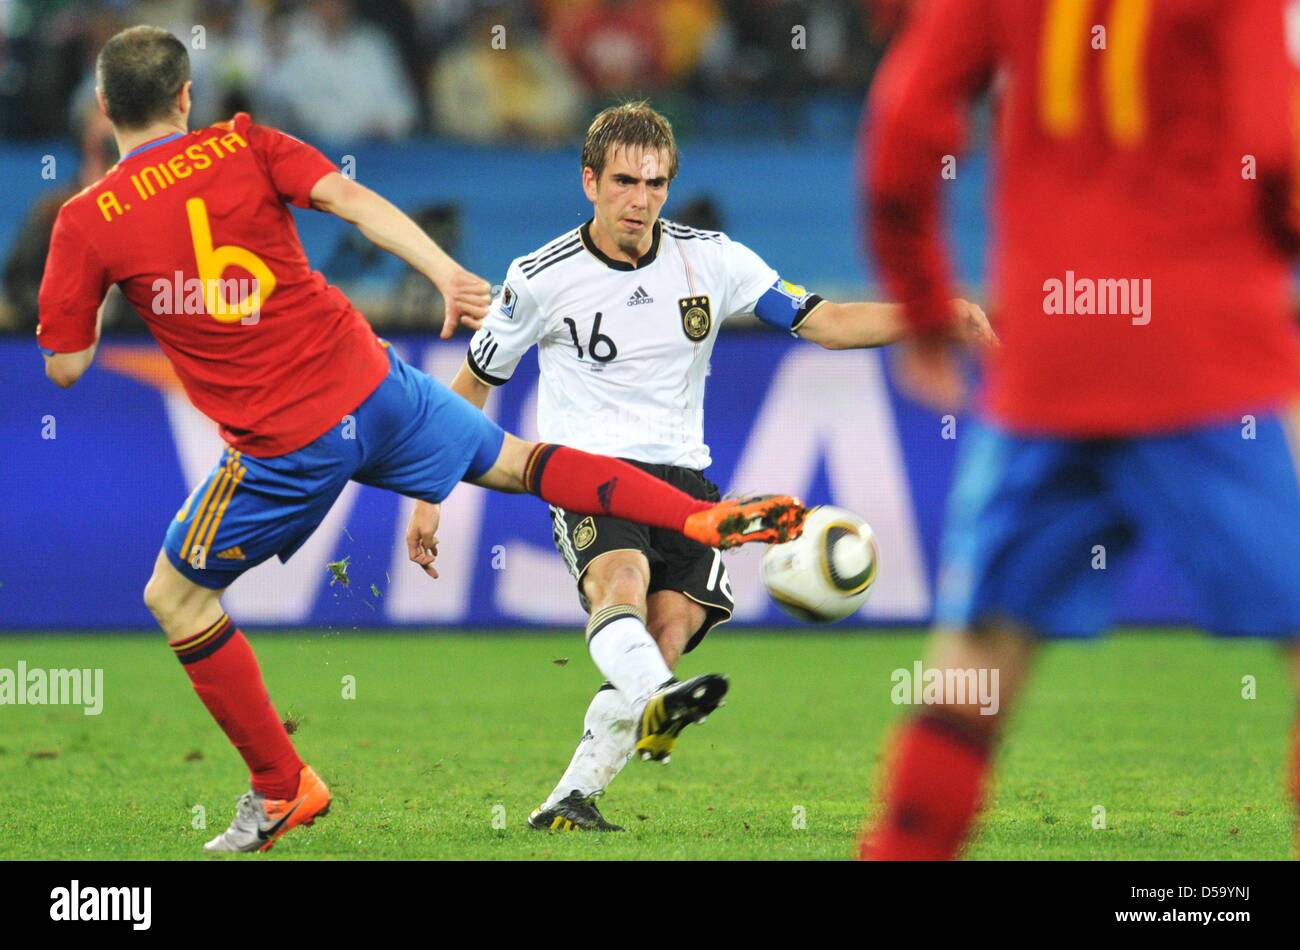 Andres Iniesta (L) of Spain vies with Philipp Lahm of Germany during the 2010 FIFA World Cup semi-final match between Germany and Spain at the Durban Stadium in Durban, South Africa 07 July 2010. Photo: Bernd Weissbrod dpa - Please refer to http://dpaq.de/FIFA-WM2010-TC Stock Photo